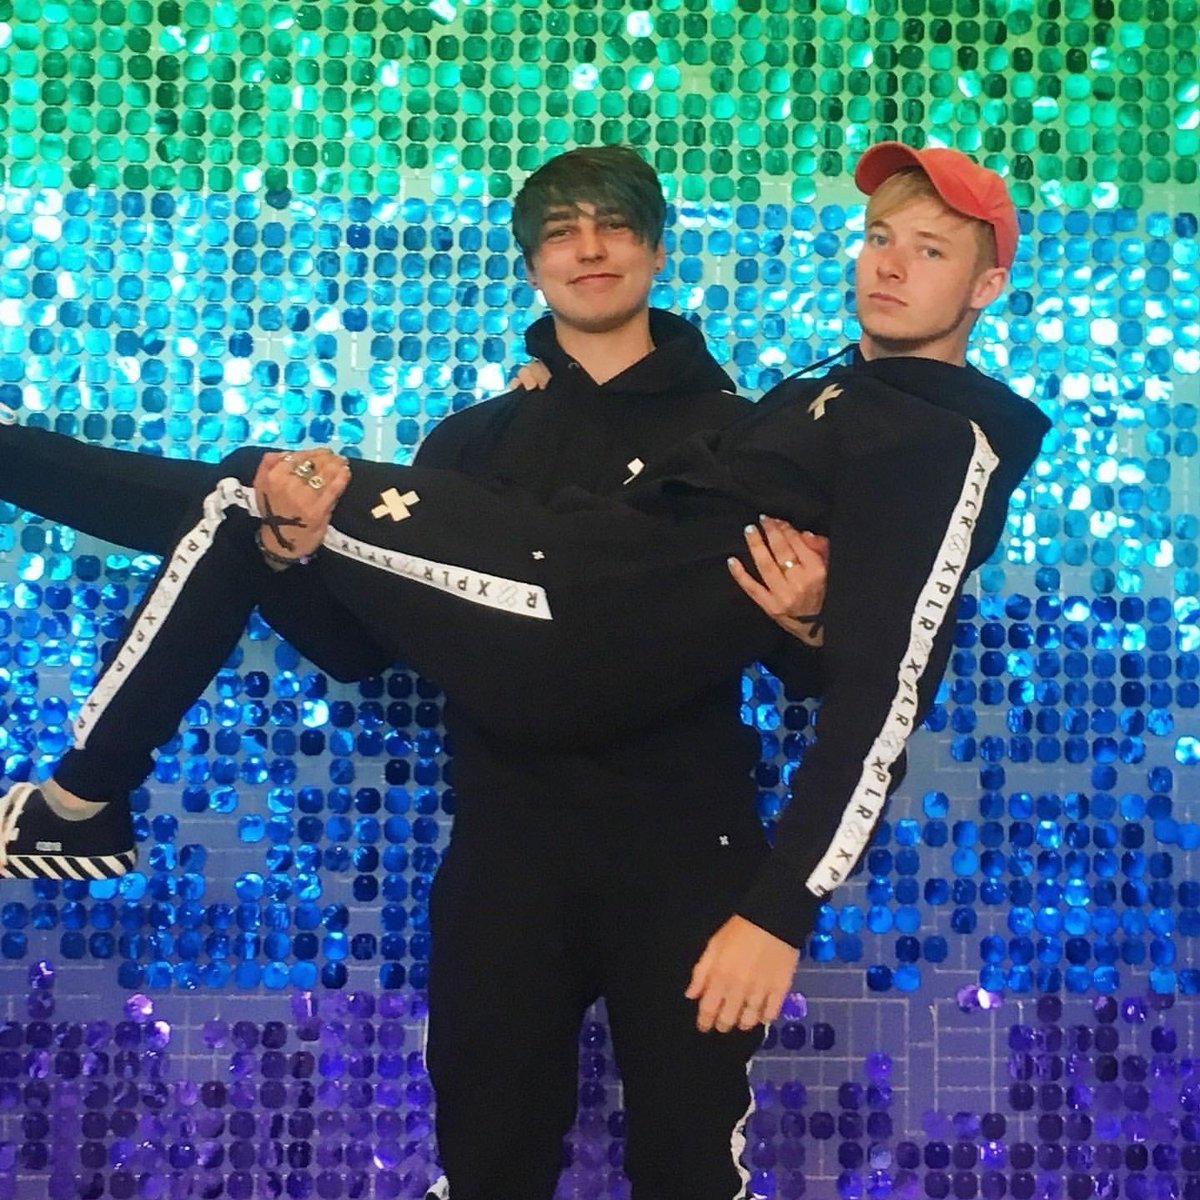 Sam and colby I just want you to know you guys have changed my life I used ...